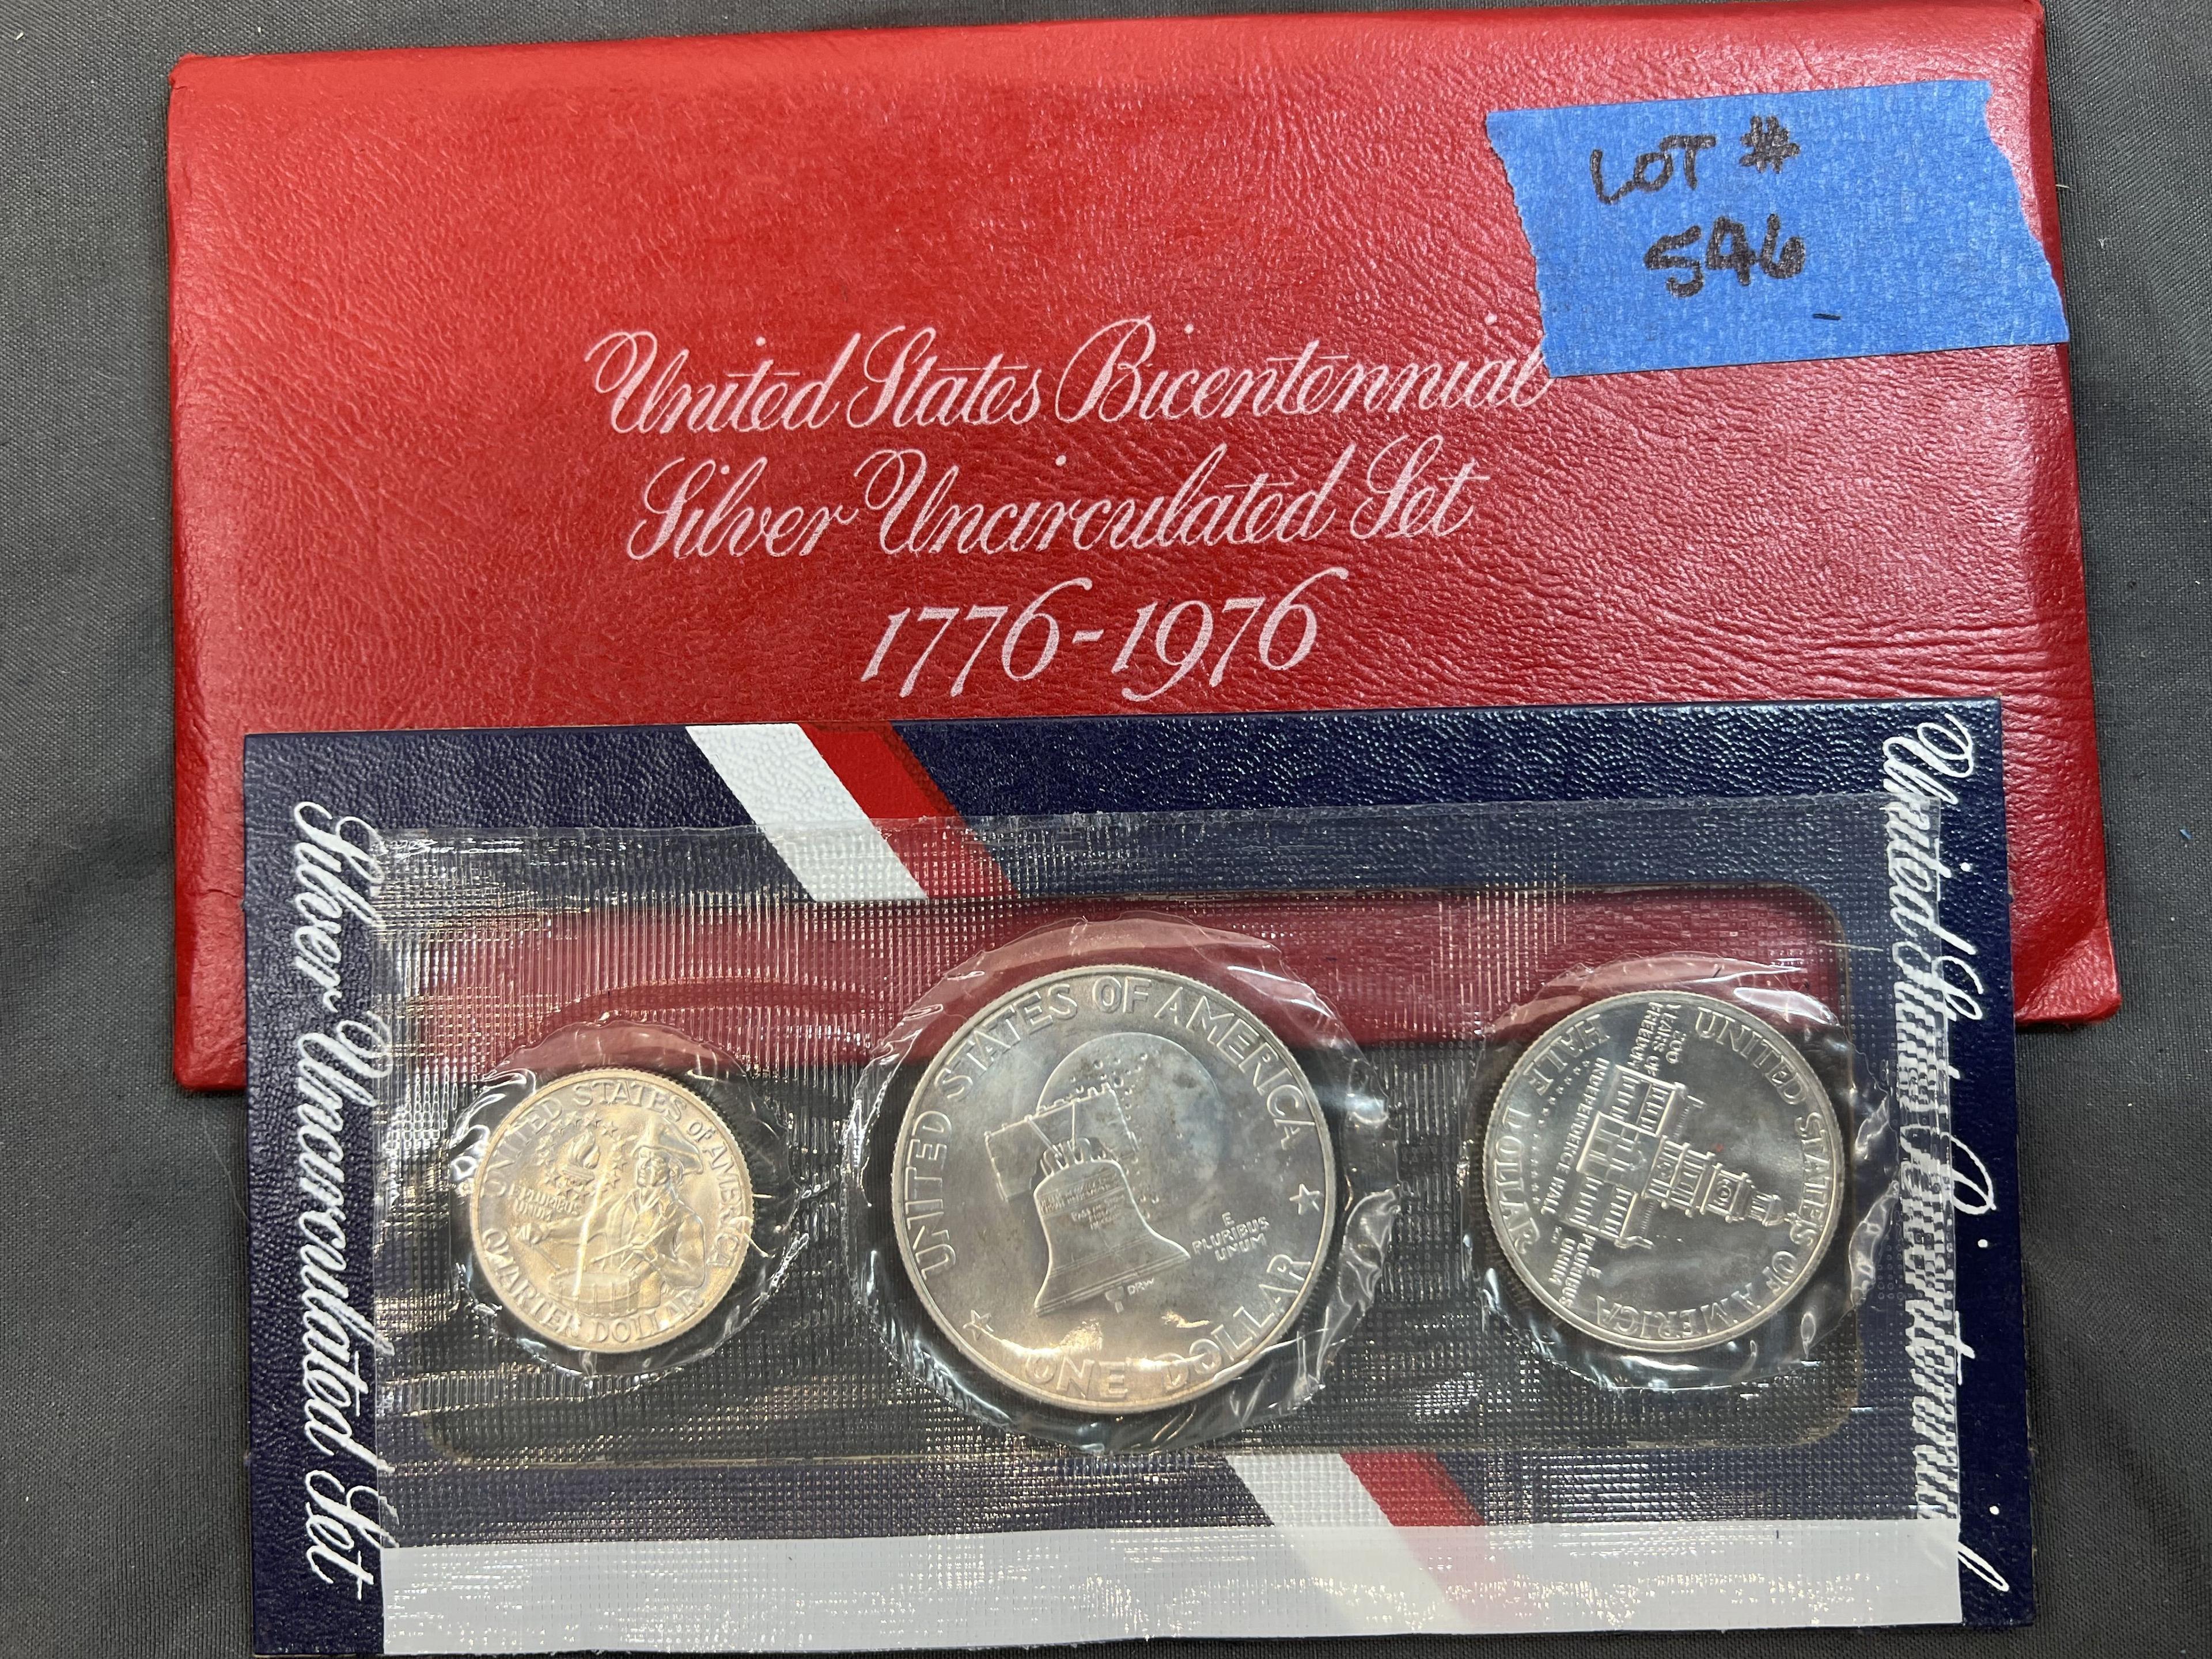 1976 United States Bicentennial Silver Uncirculated 3 Coin Set